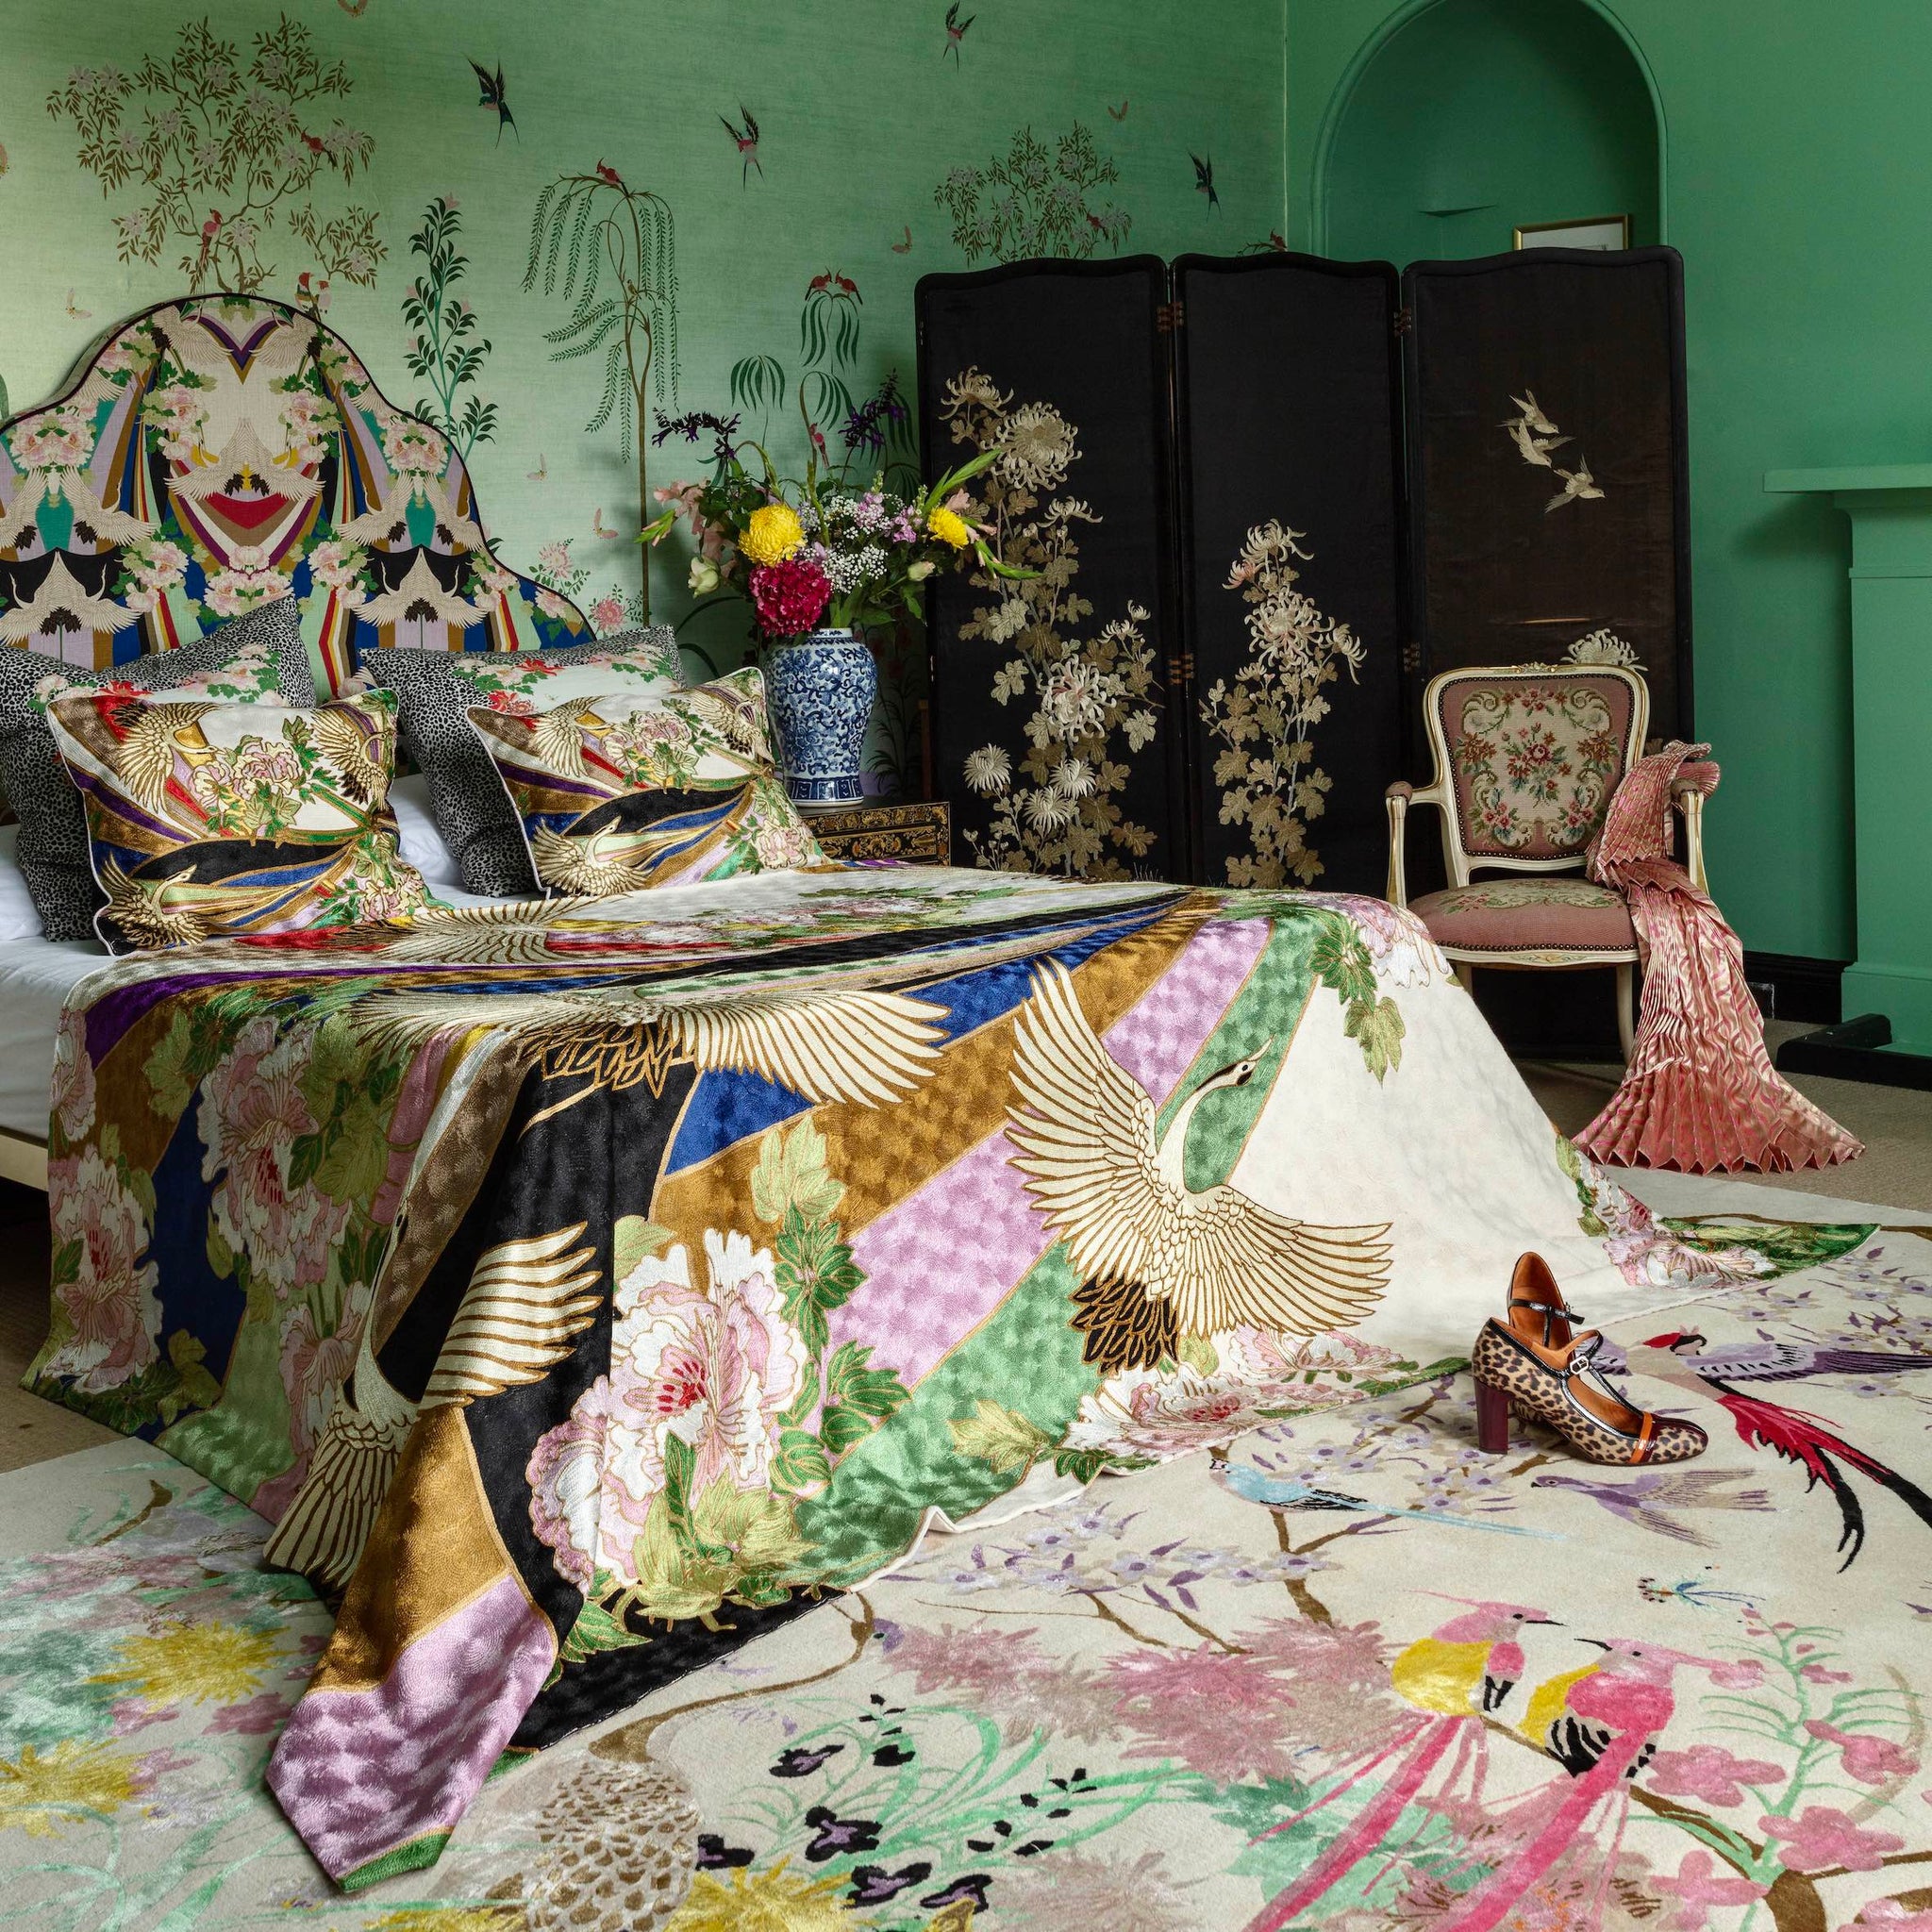 A Chinoiserie Christmas as styled by Wendy Morrison